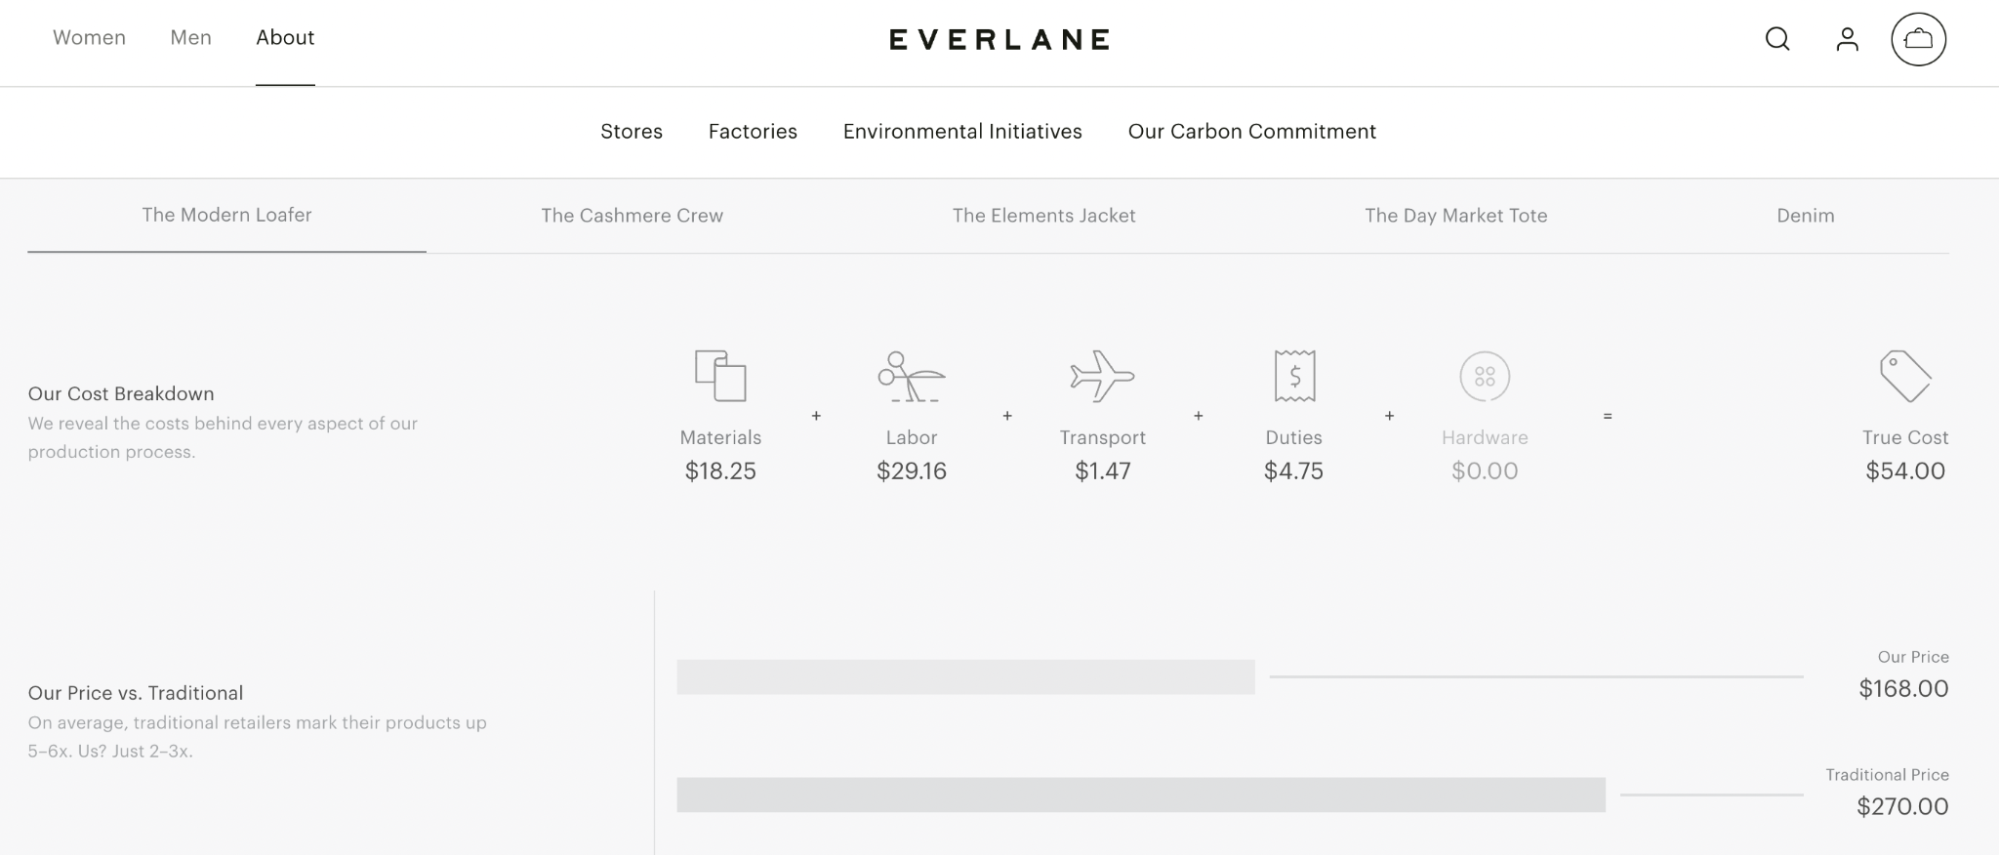 Image showing Everlane’s true cost calculator providing pricing transparency for shoppers